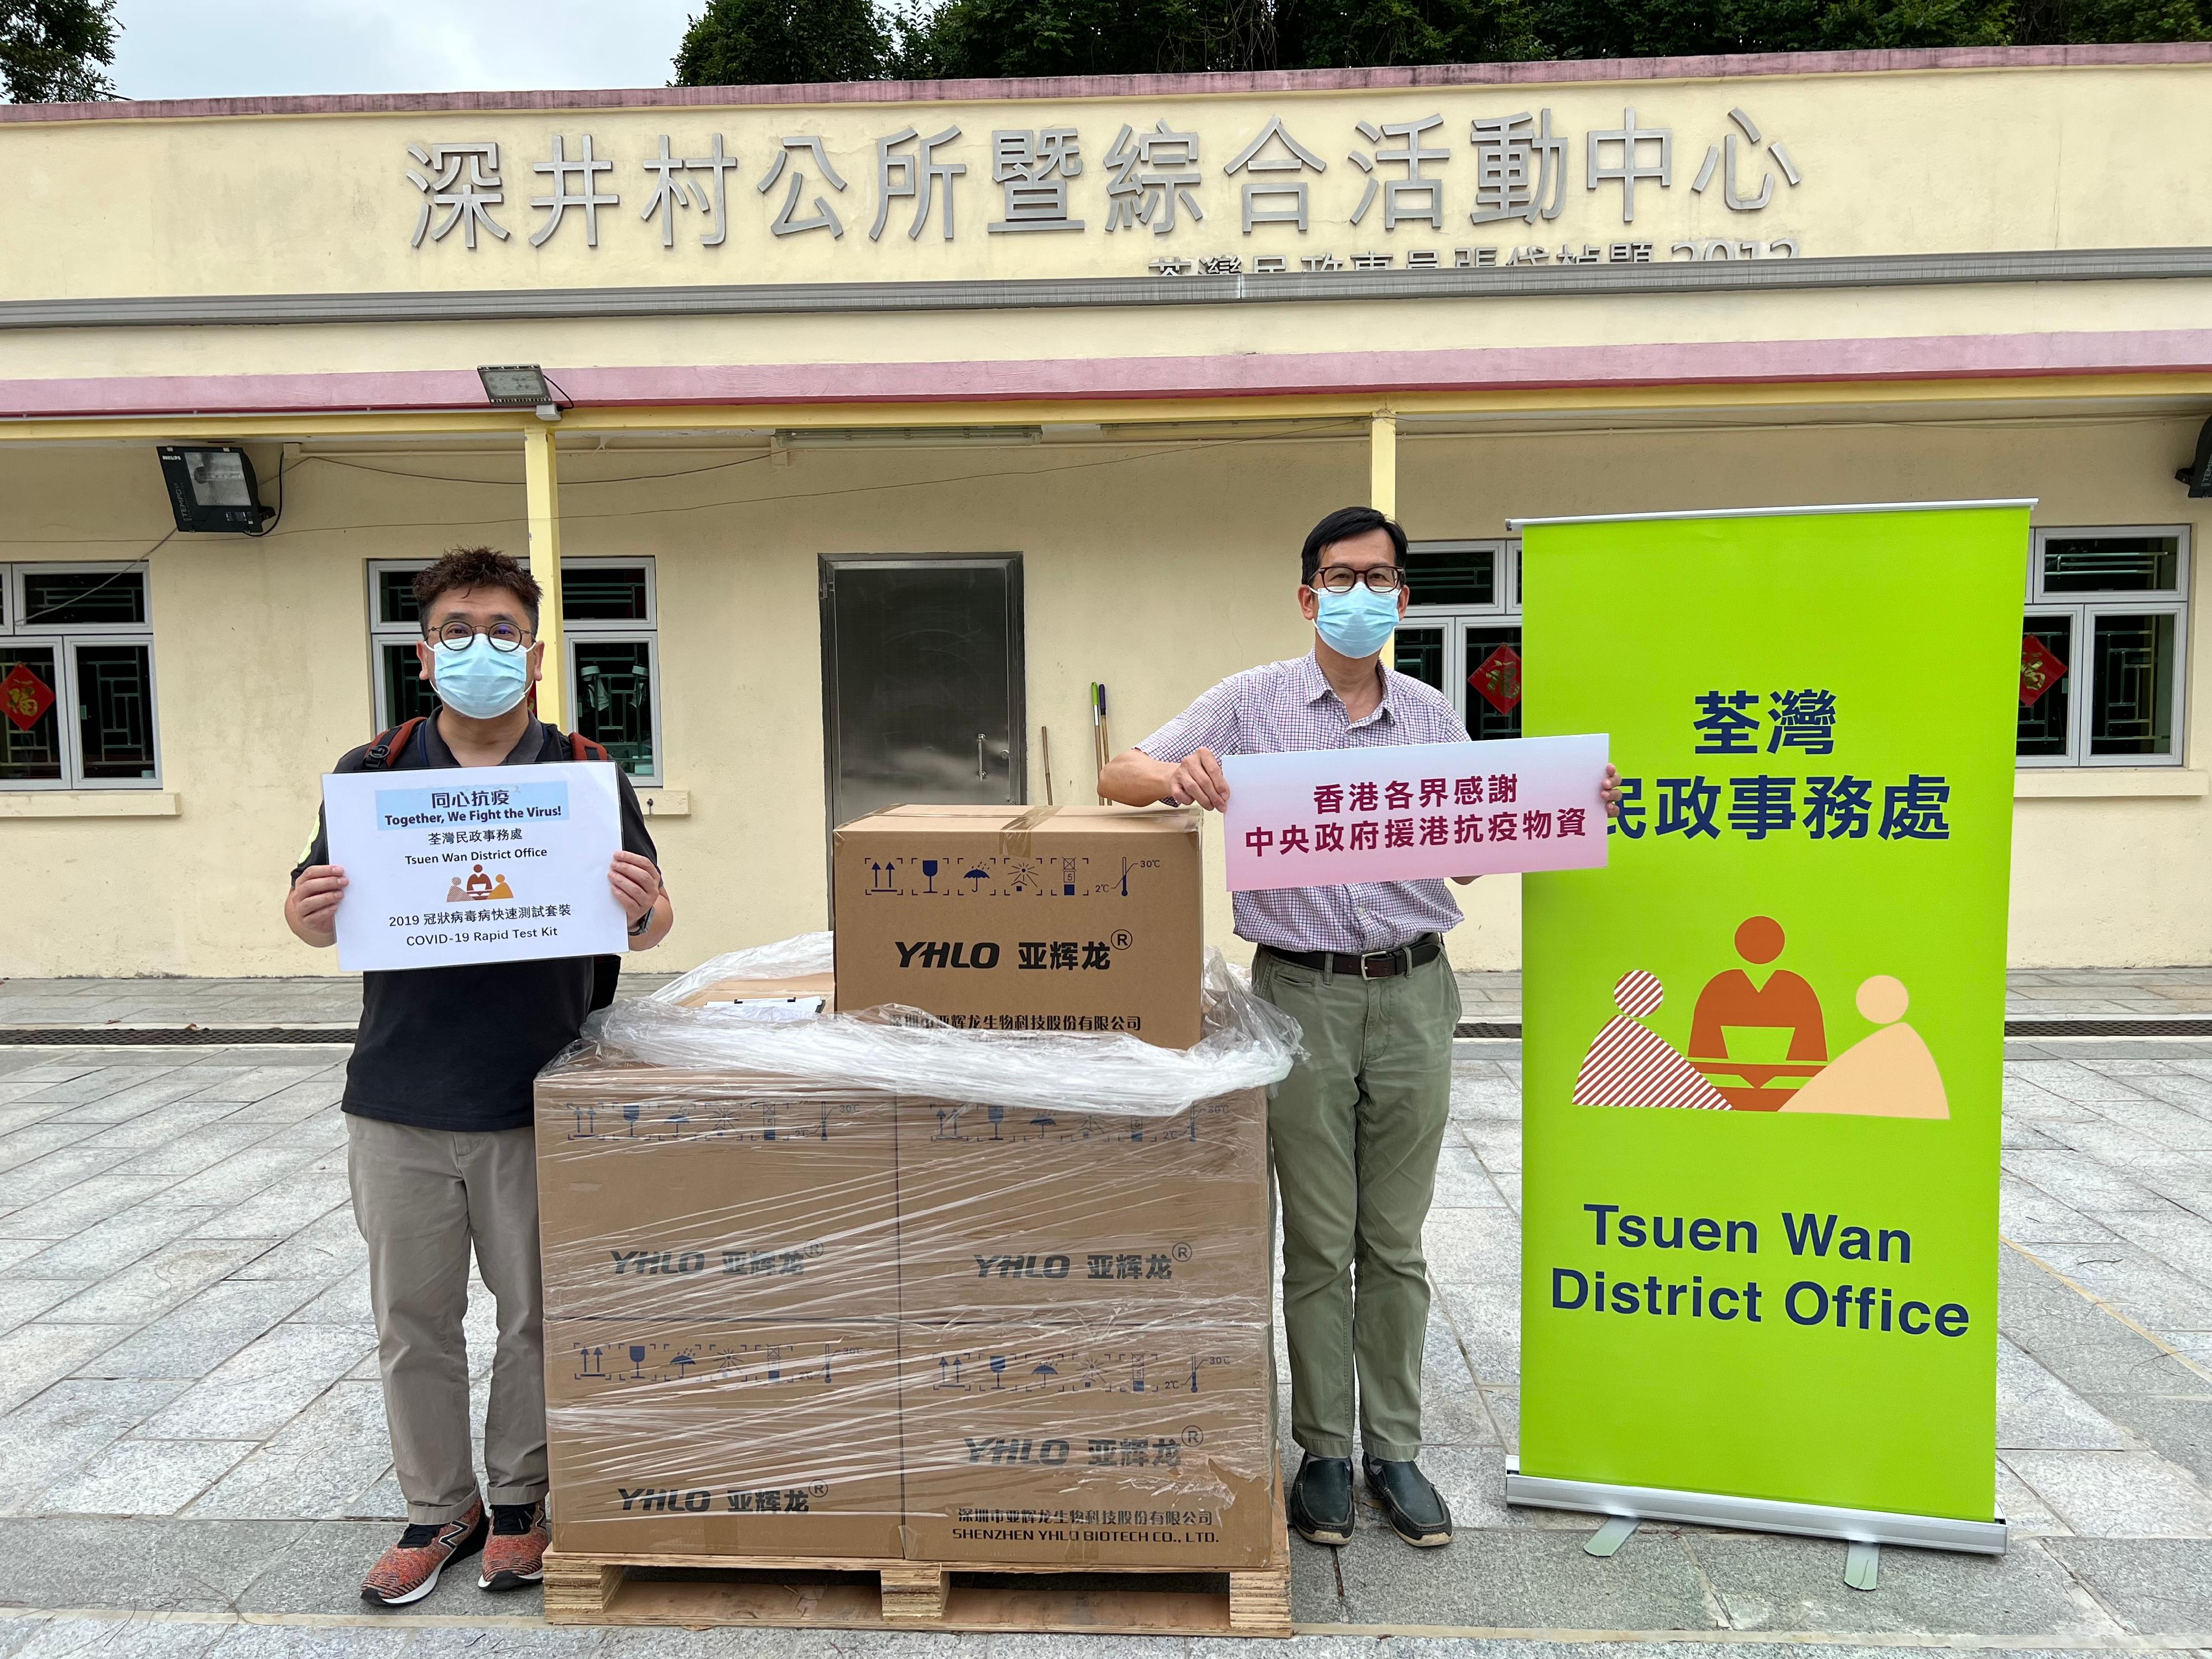 The Tsuen Wan District Office today (May 10) distributed COVID-19 rapid test kits to households living in Sham Tseng Village for voluntary testing through the Village Representatives and non-governmental organisations.